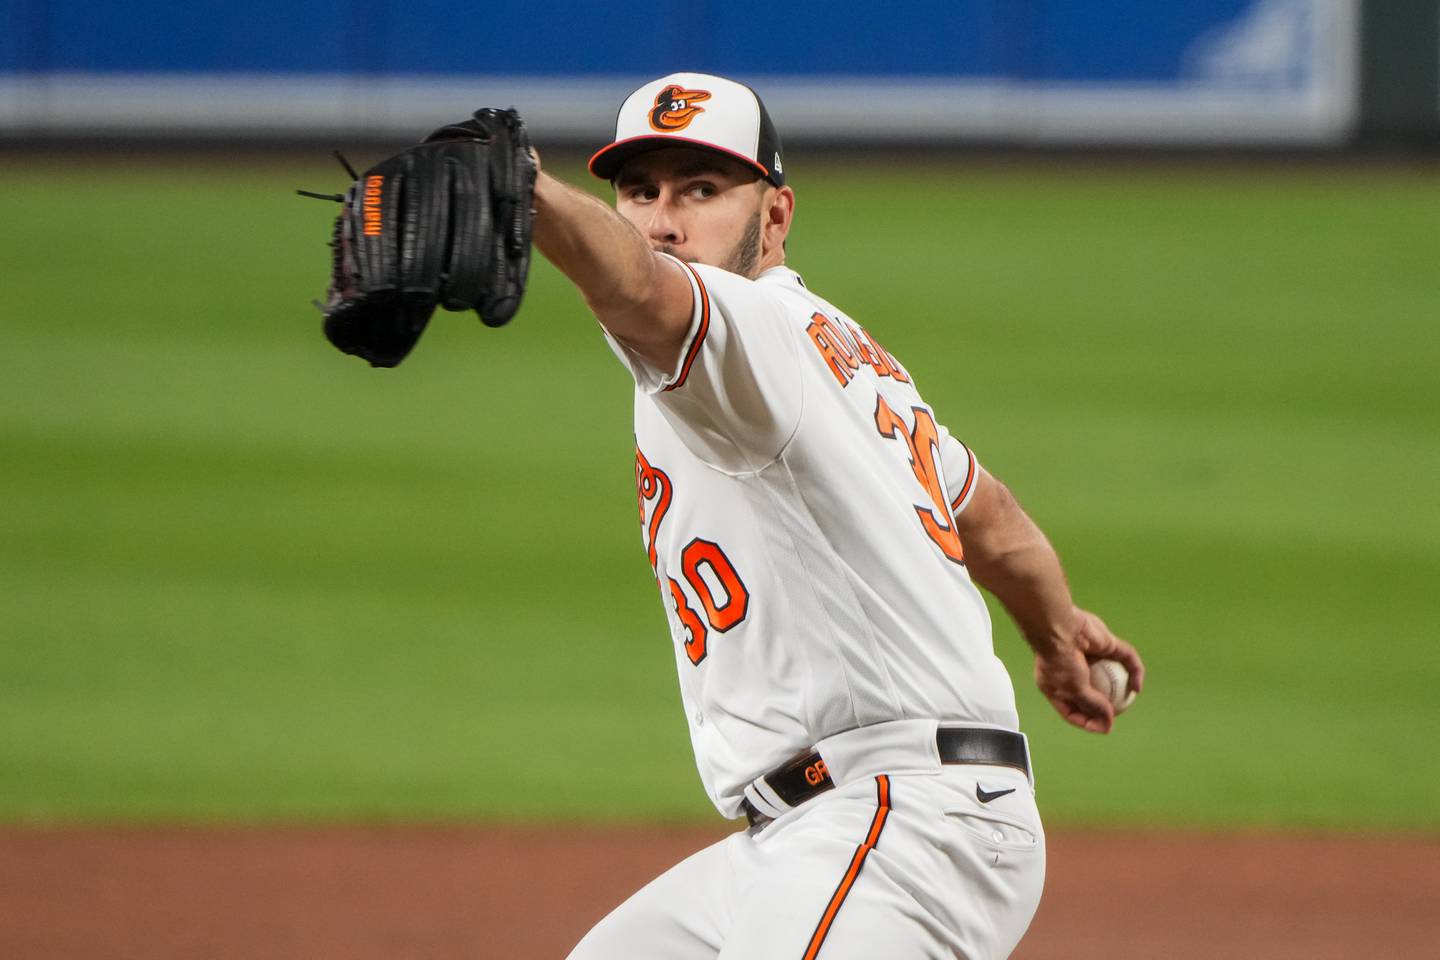 Baltimore Orioles starting pitcher Grayson Rodriguez (30) pitches during a baseball game against the Chicago White Sox at Camden Yards on Monday, August 28.